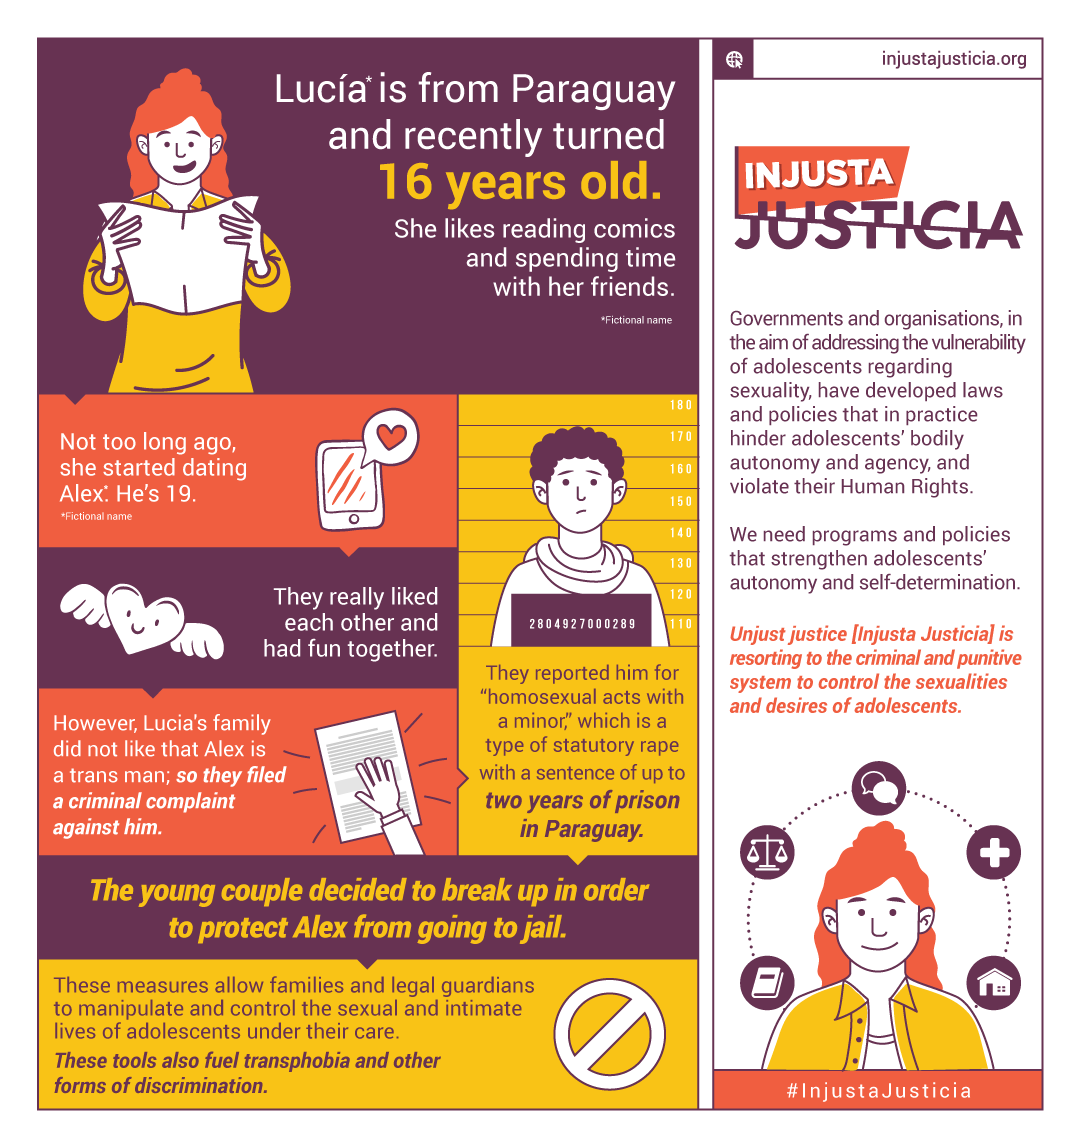 Infographic about Lucia's case, which is explained below. Full description available for download.